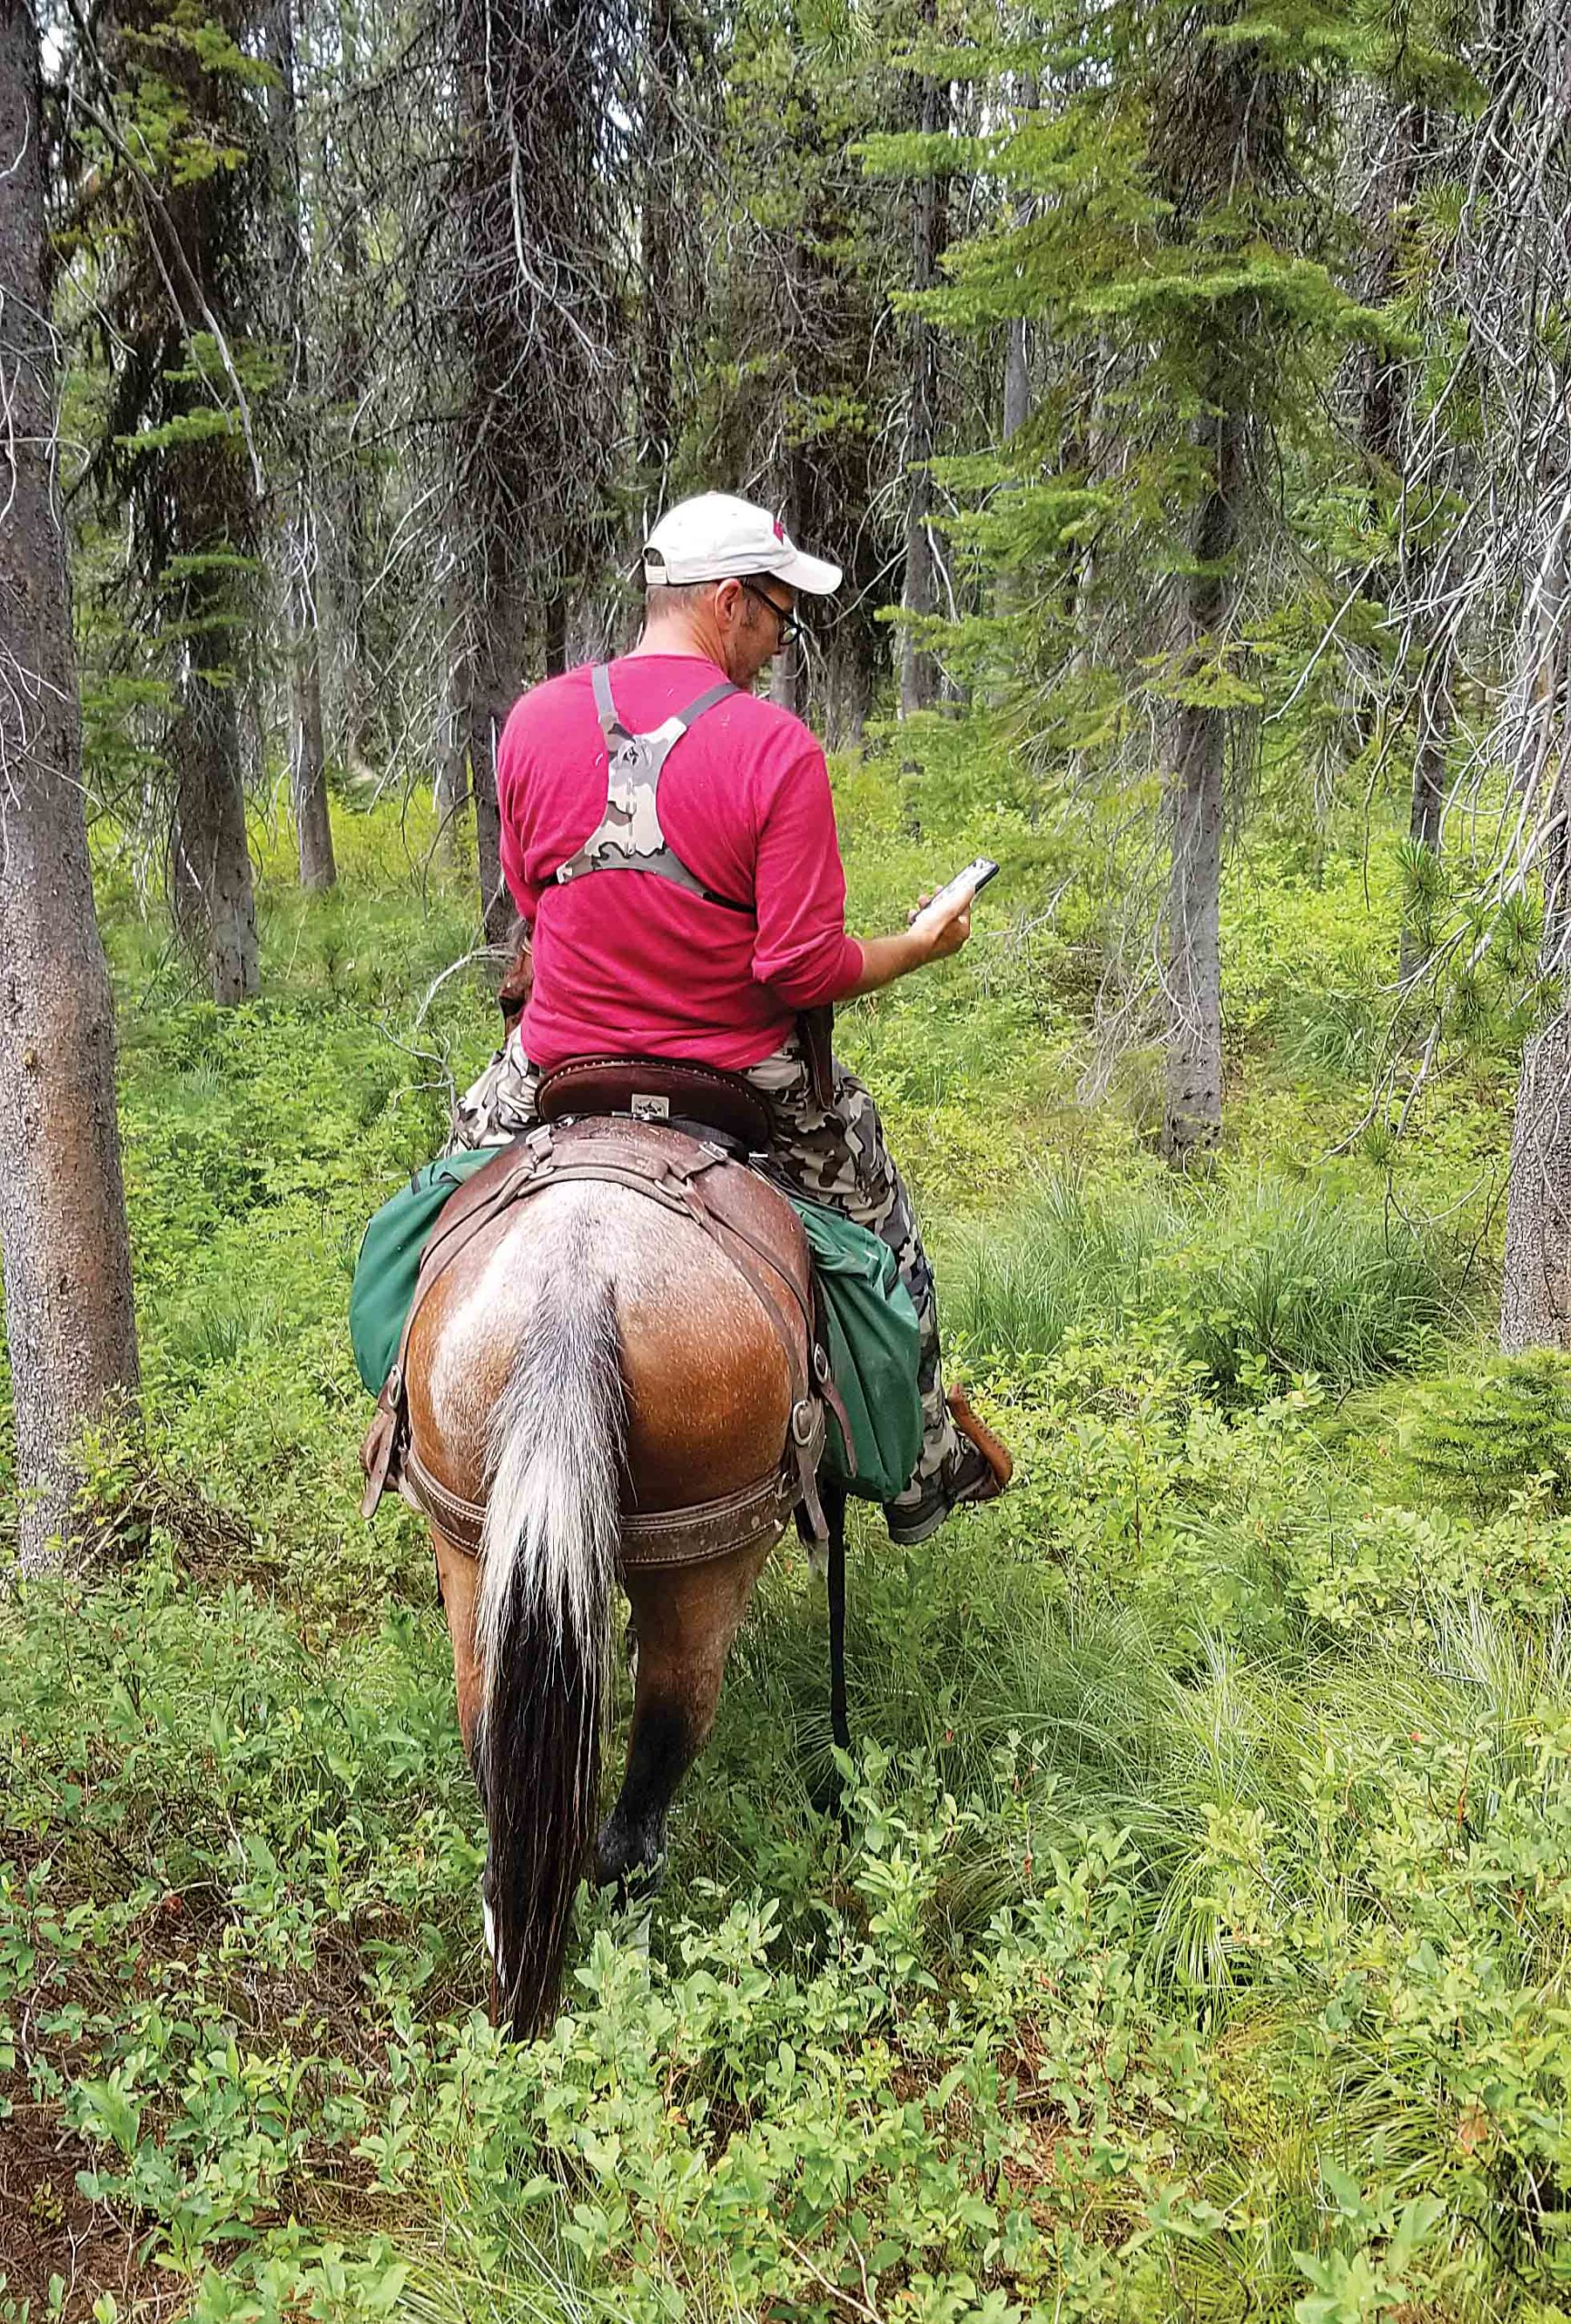 Checking a map on his phone while horseback hunting